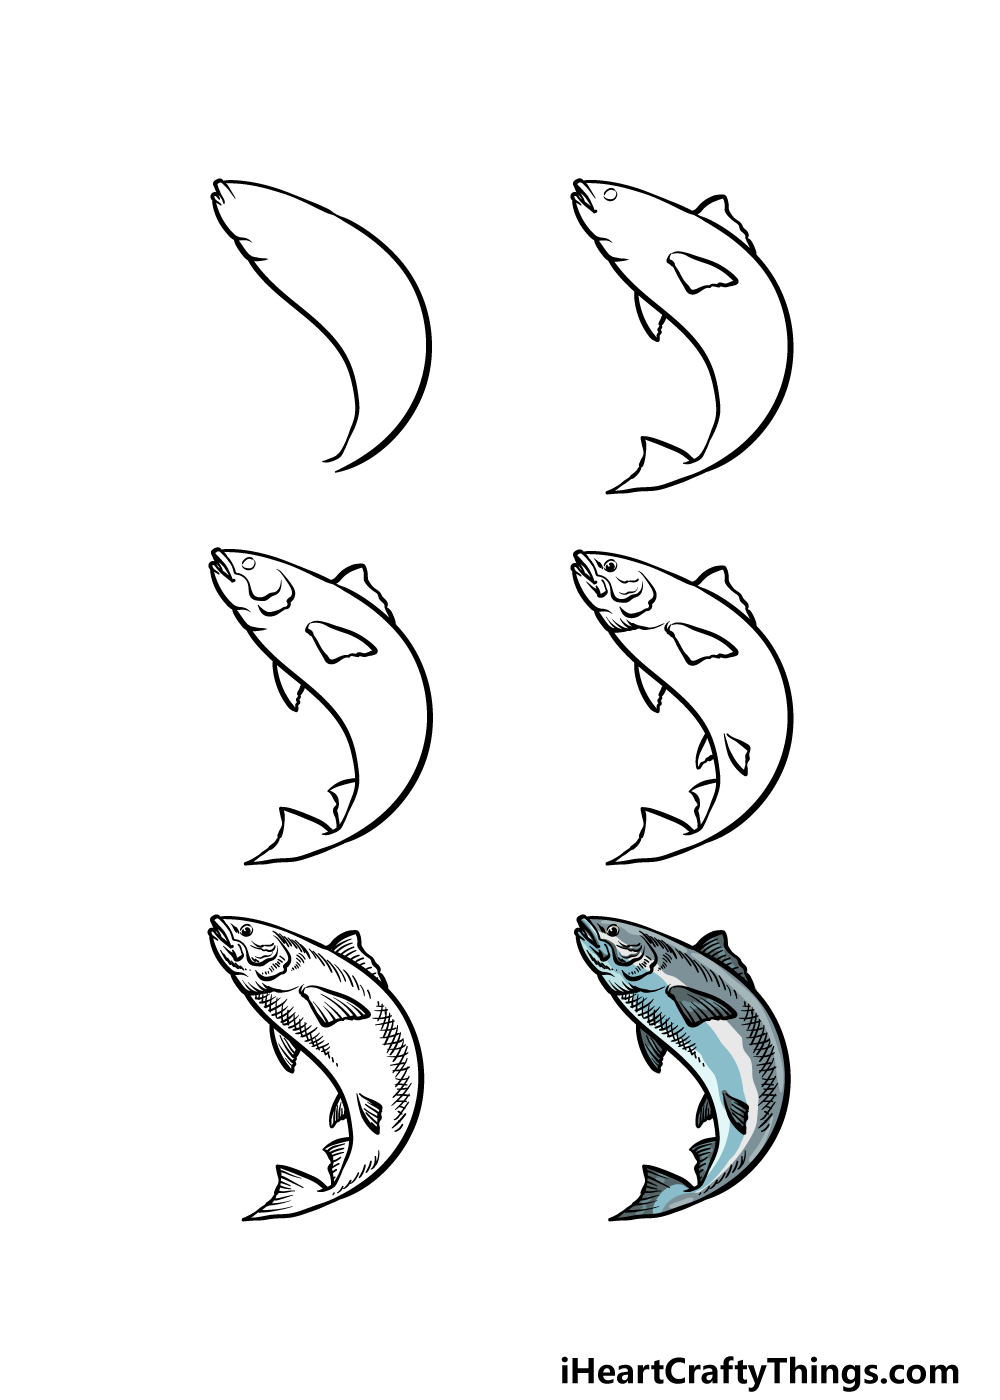 how to draw a Salmon in 6 steps